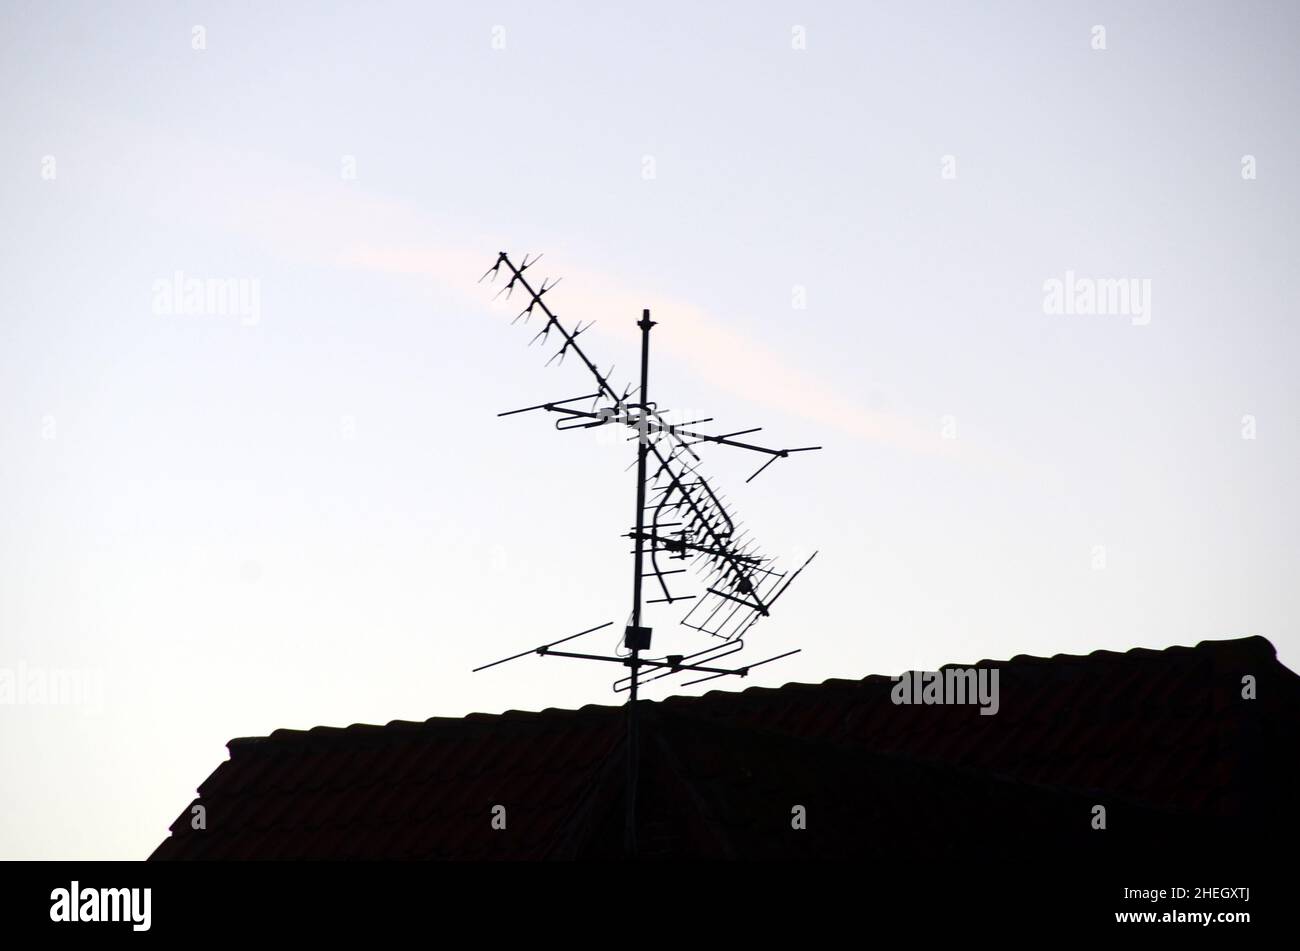 Silhouette of storm damaged UHF TV antenna on a roof. Stock Photo